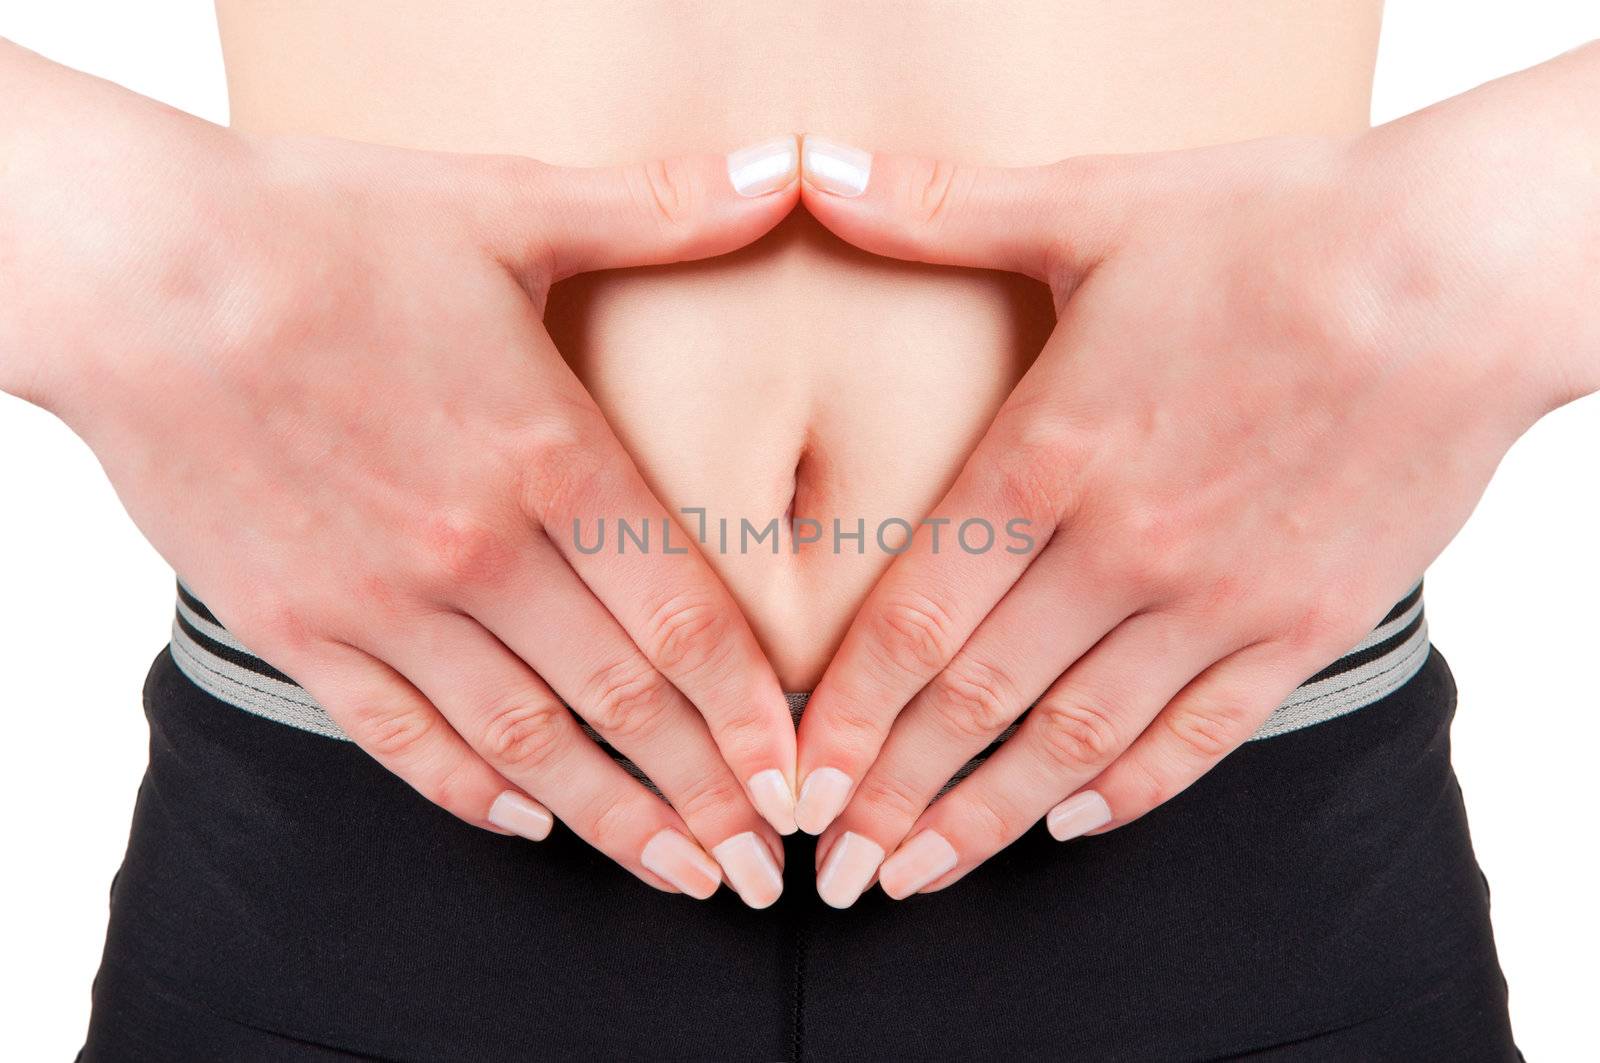 Woman with her hands around her belly button